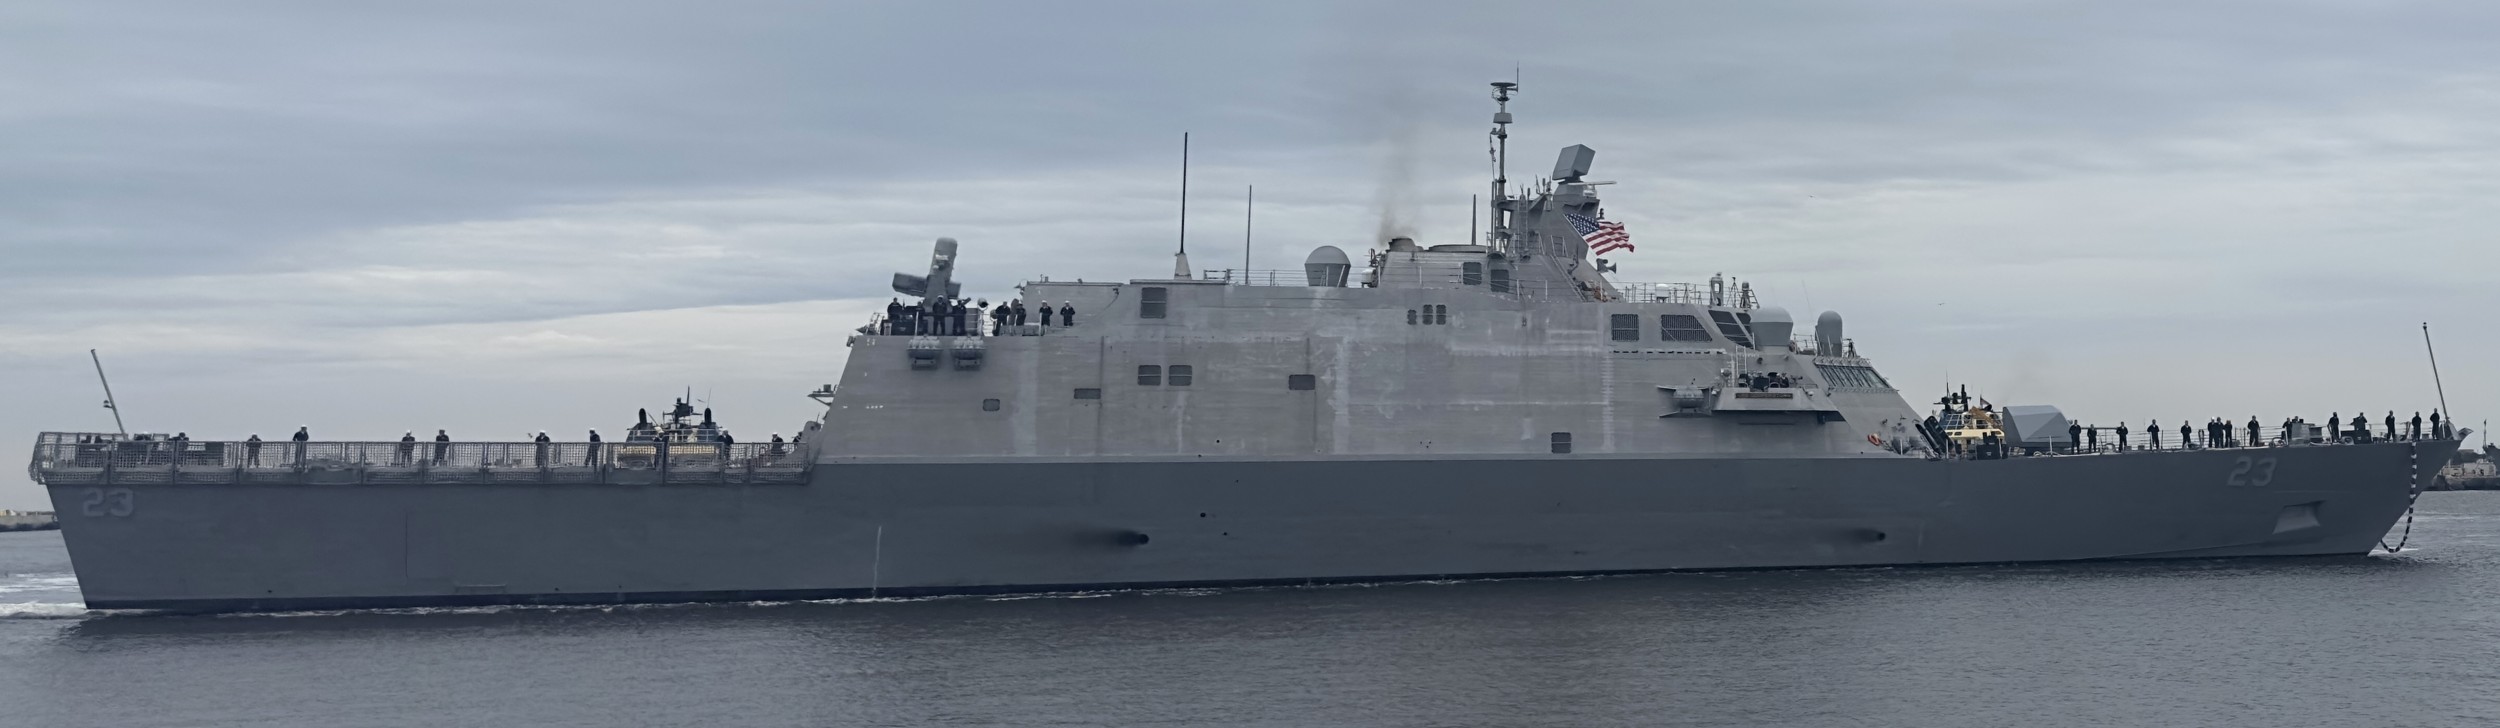 lcs-23 uss cooperstown freedom class littoral combat ship us navy naval station mayport florida 24